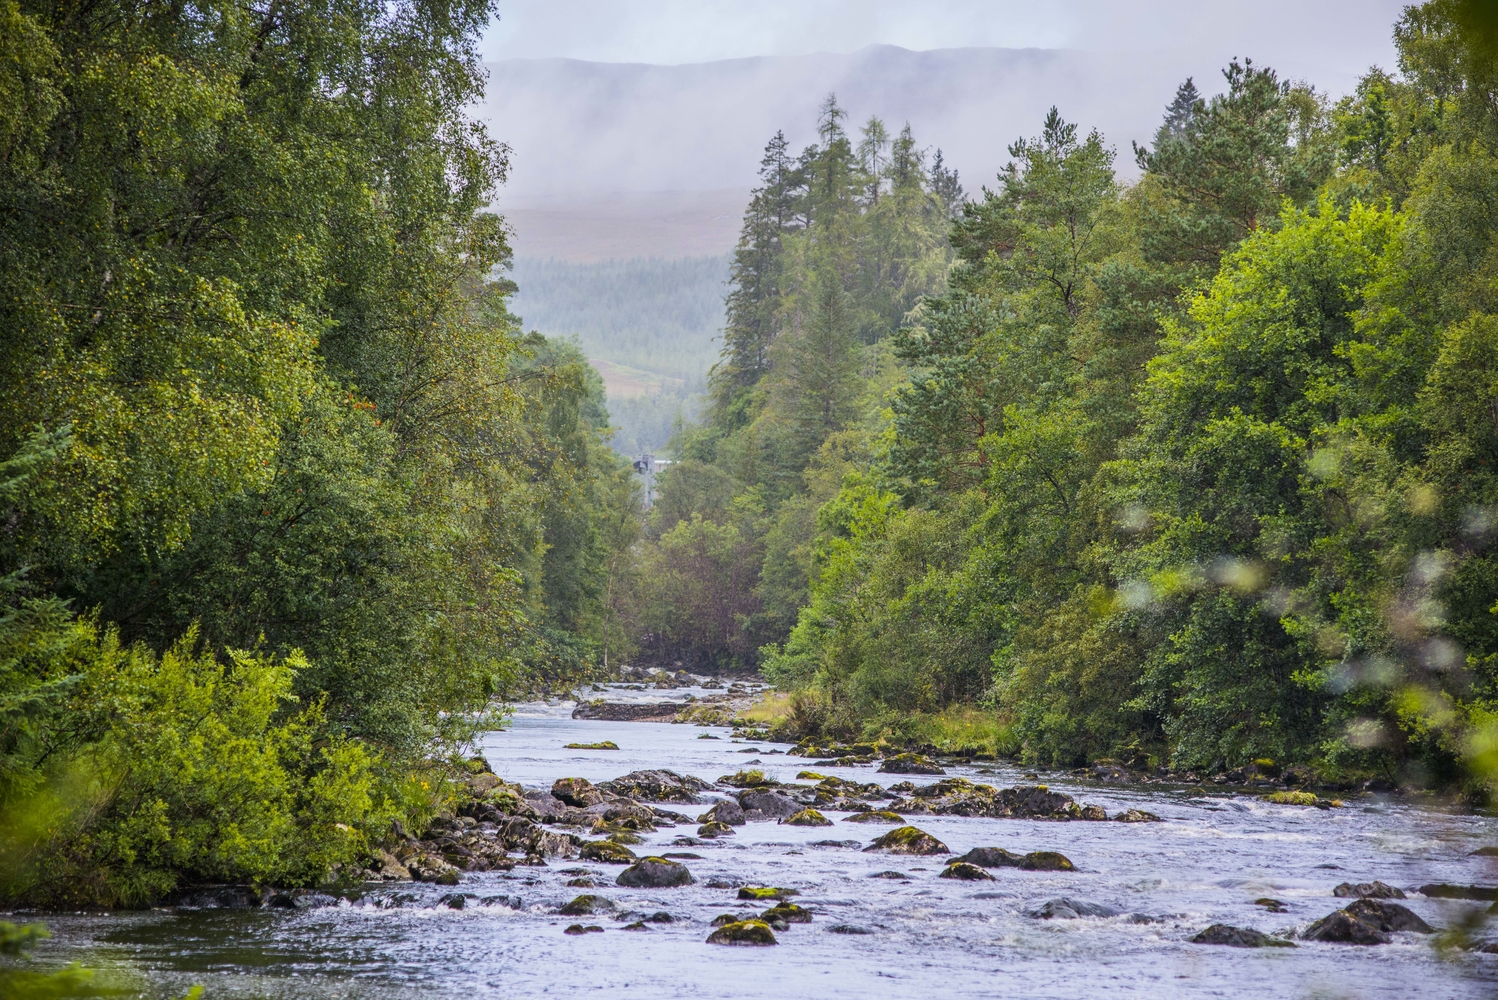 View along the River Garry, flanked by trees and greenery, Glengarry, near Invergarry